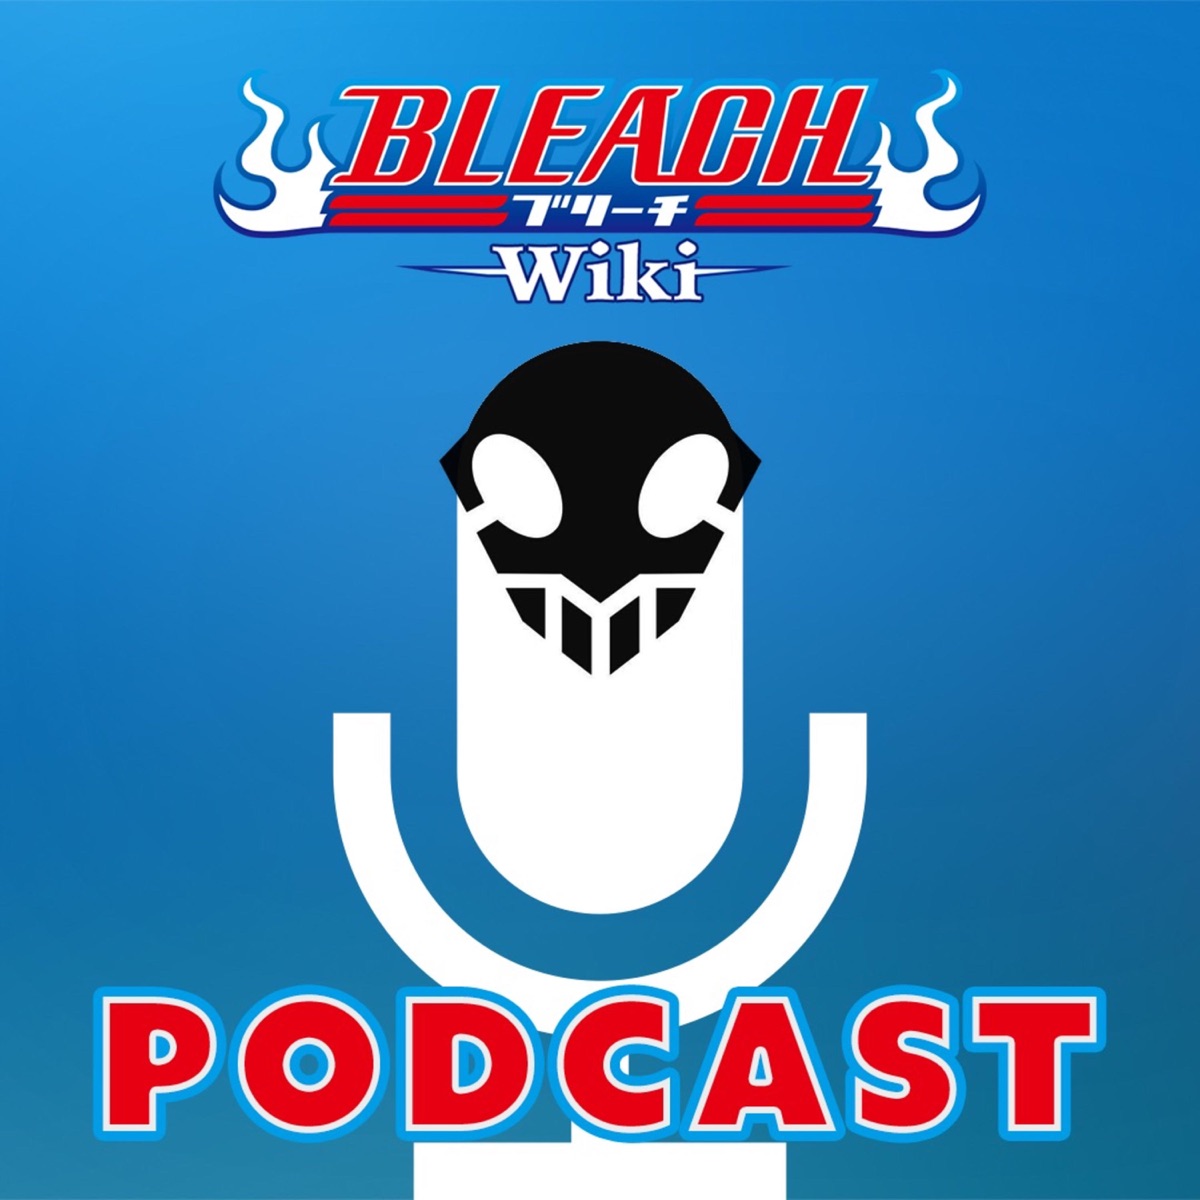 Bleach Wiki Podcast on Apple Podcasts